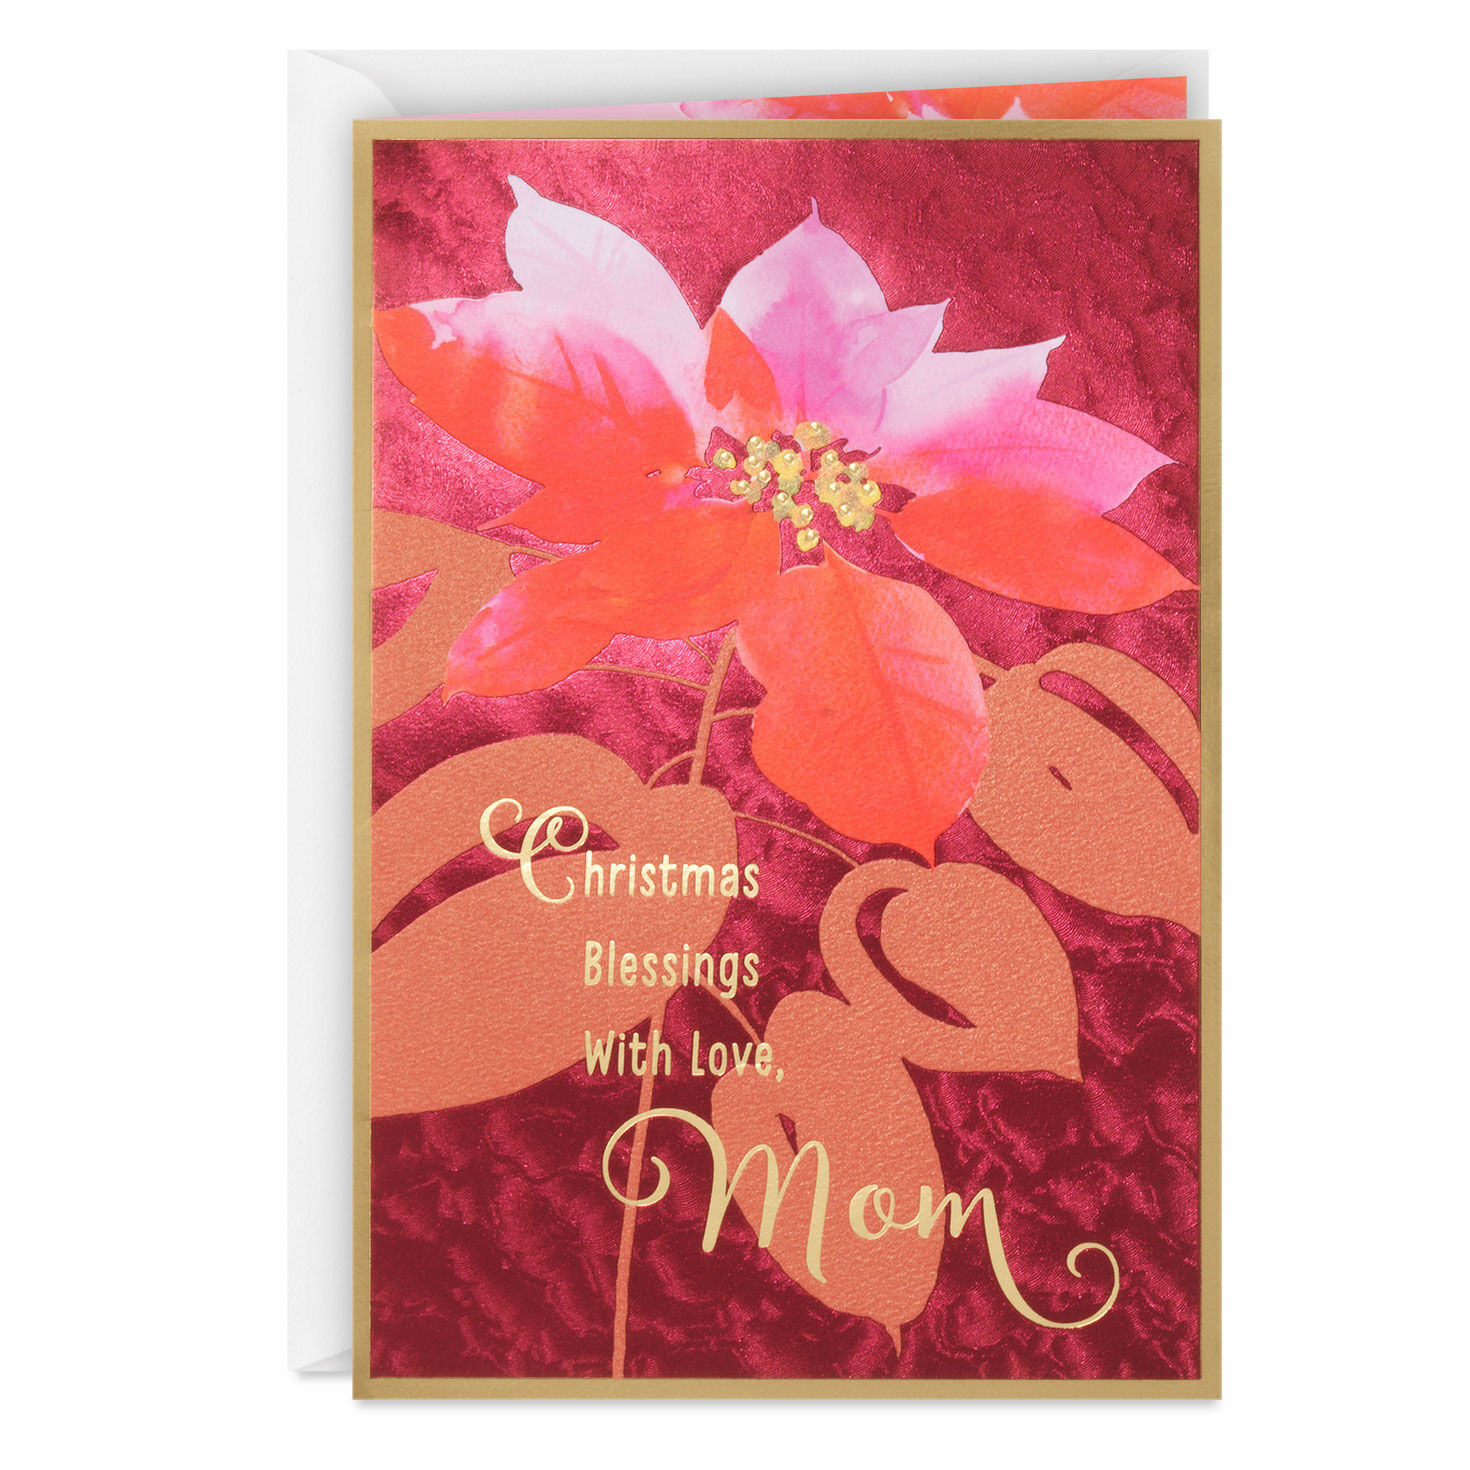 Pink Roses: Special Blessings Religious / Inspirational Birthday Card for  Mom